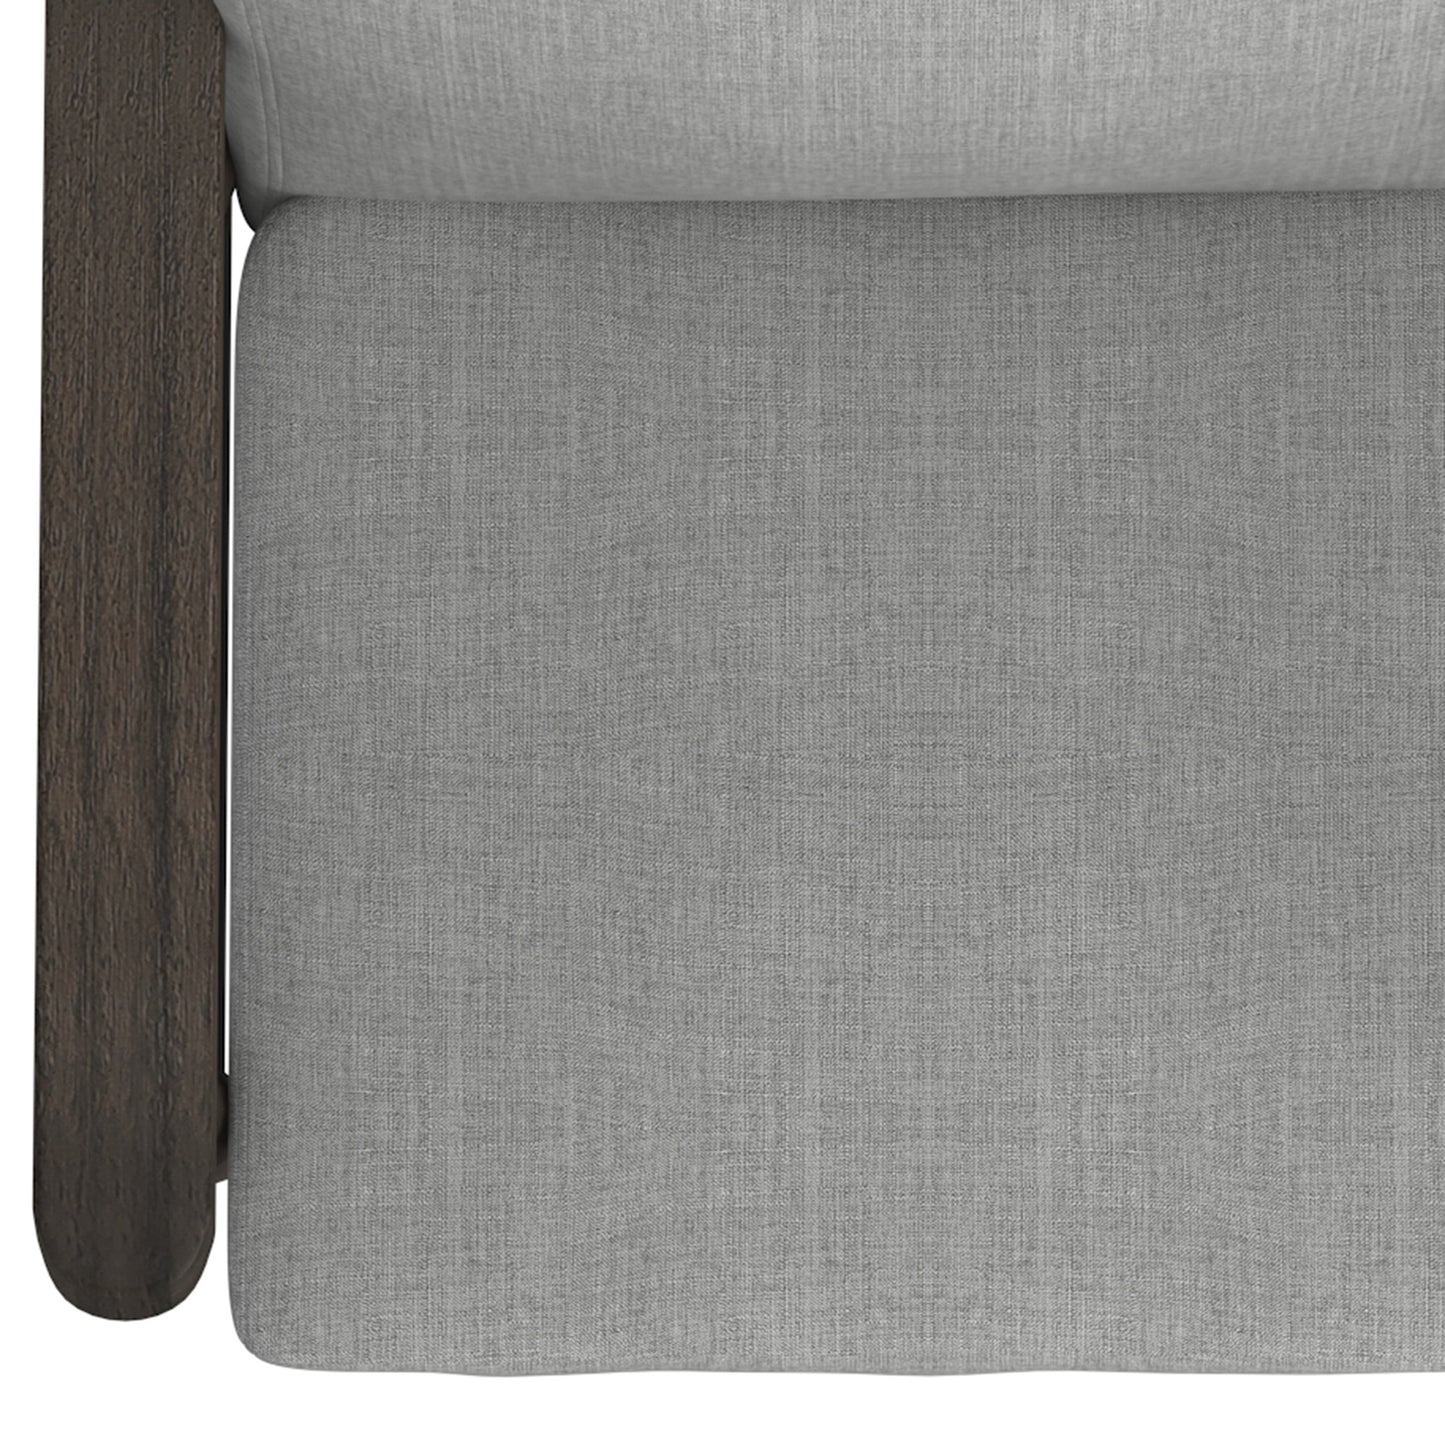 Huxly Accent Chair in Grey and Weathered Brown - WW